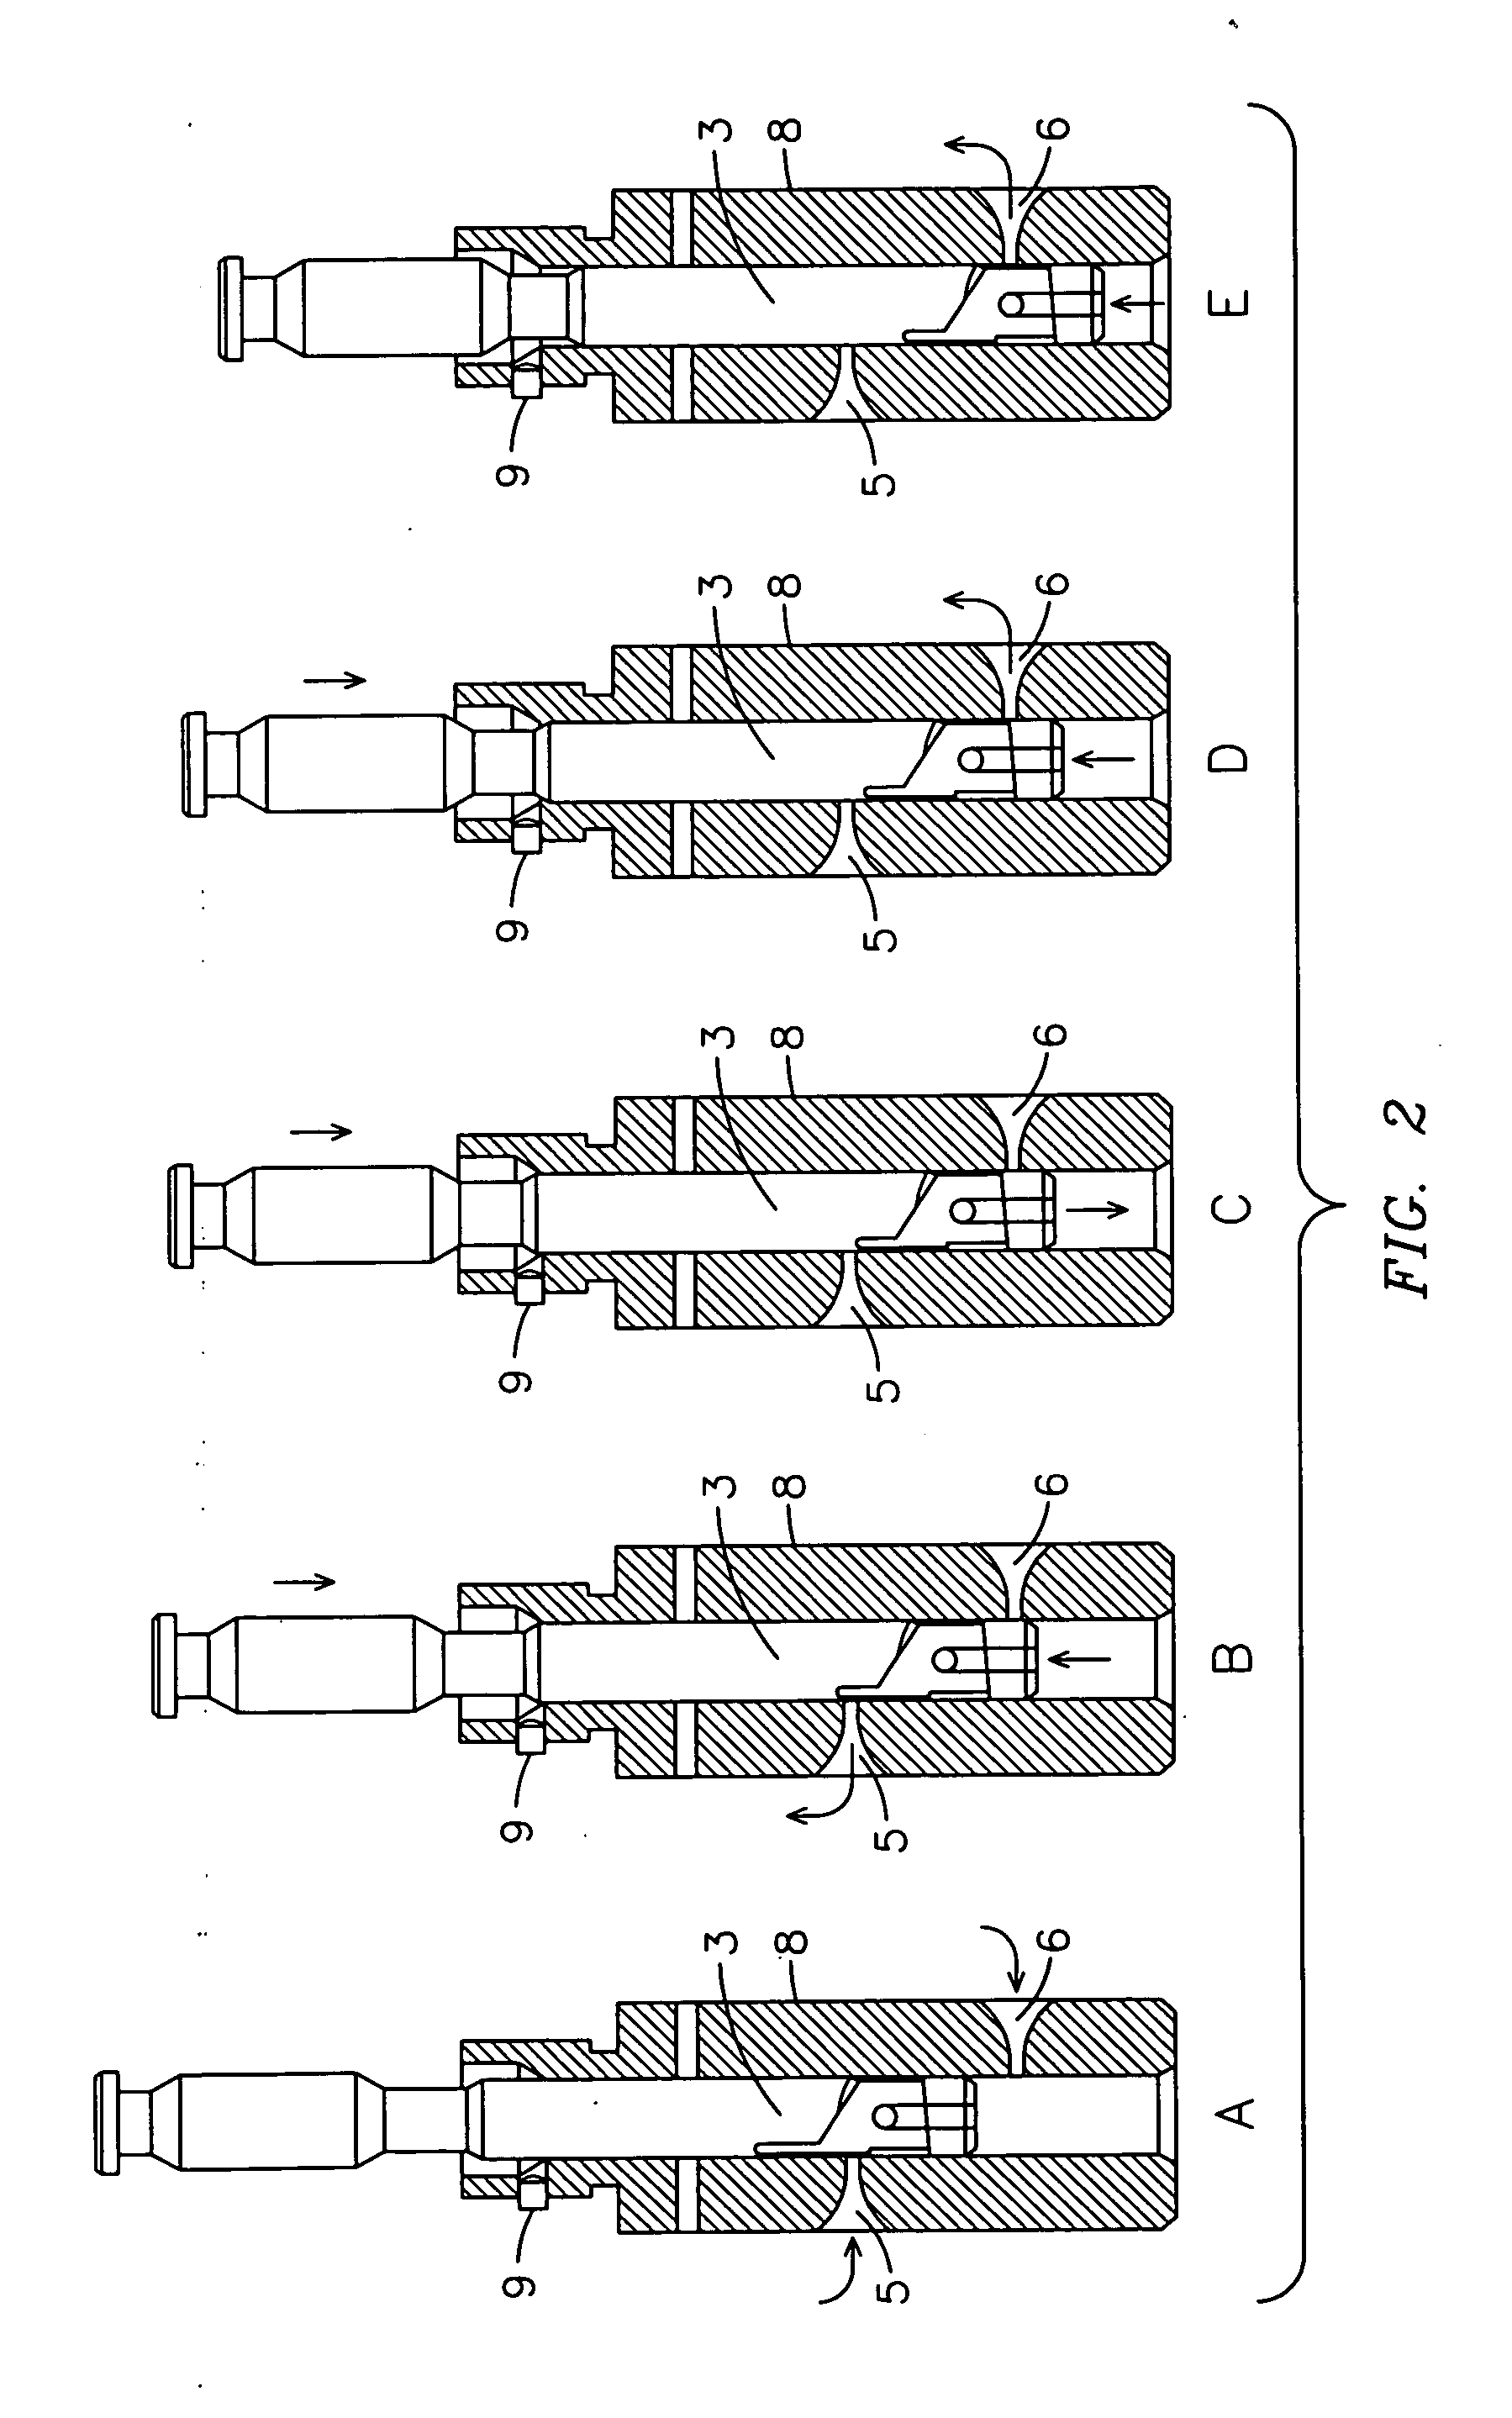 Method of retarding injection timing of mechanical unit injectors using a modified pump barrel